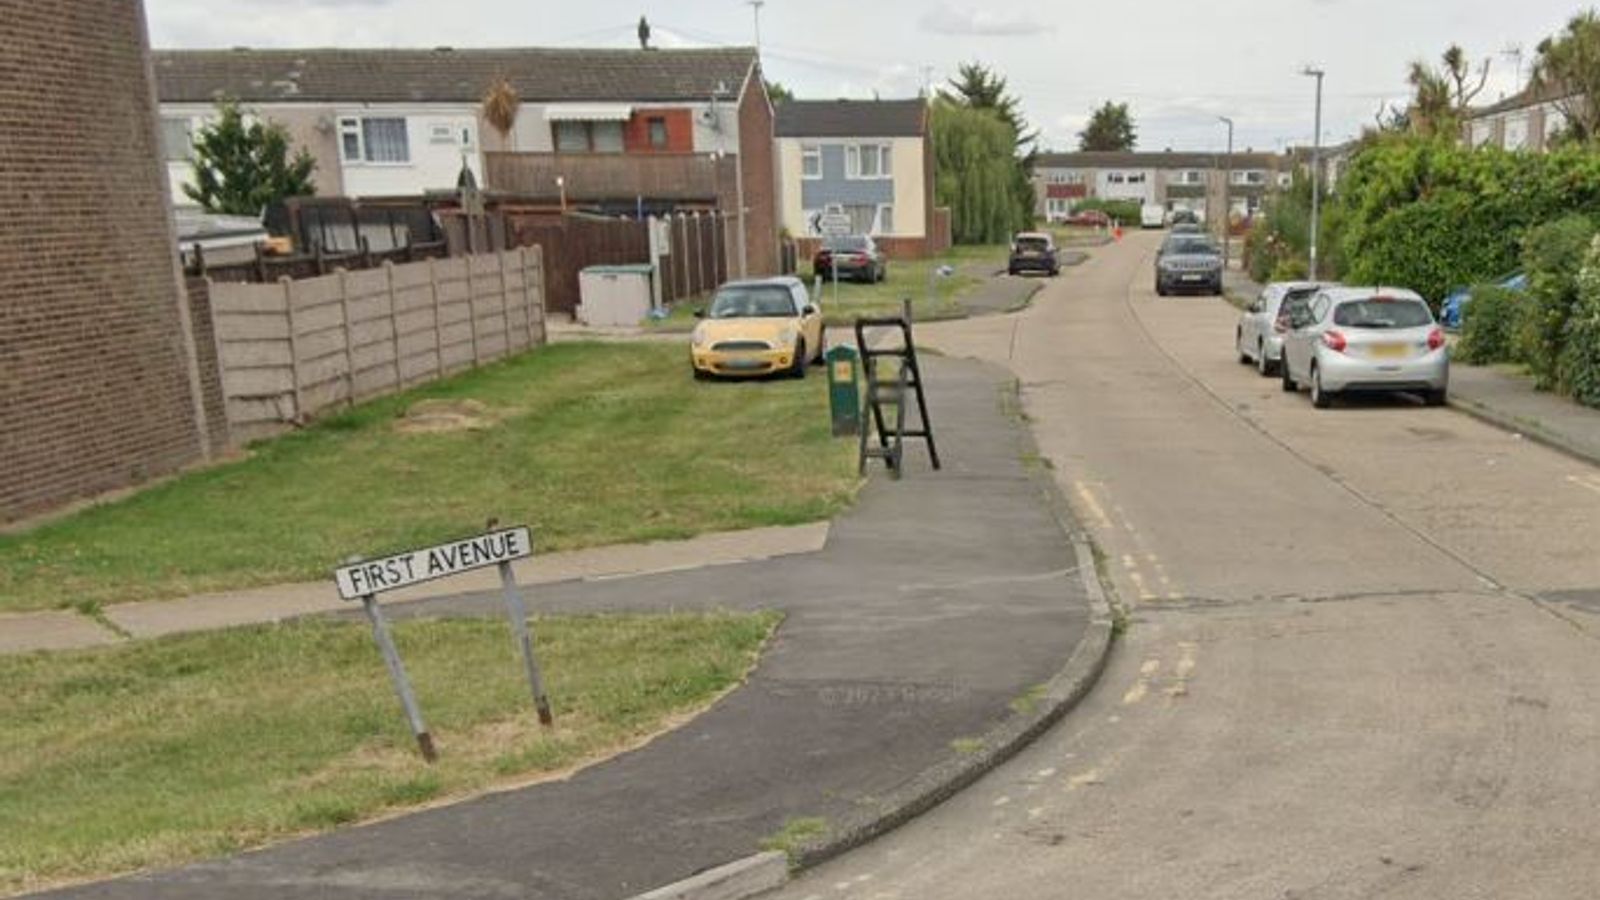 Man arrested on suspicion of attempted murder of police officer in Essex